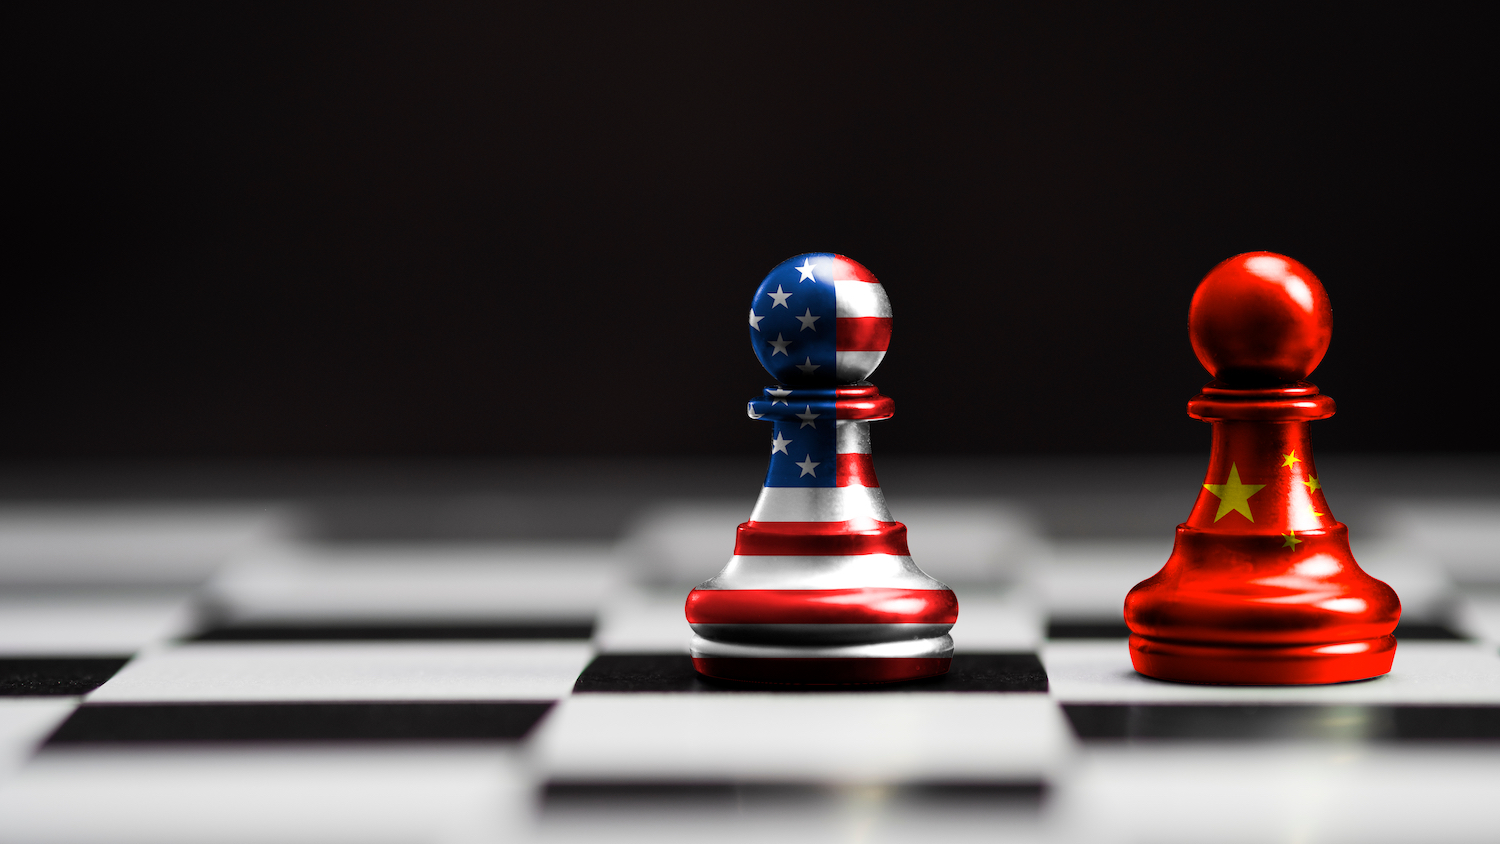 Two pawns sit side-by-side on a chess board. One is colored like the America flag, one like the Chinese flag.